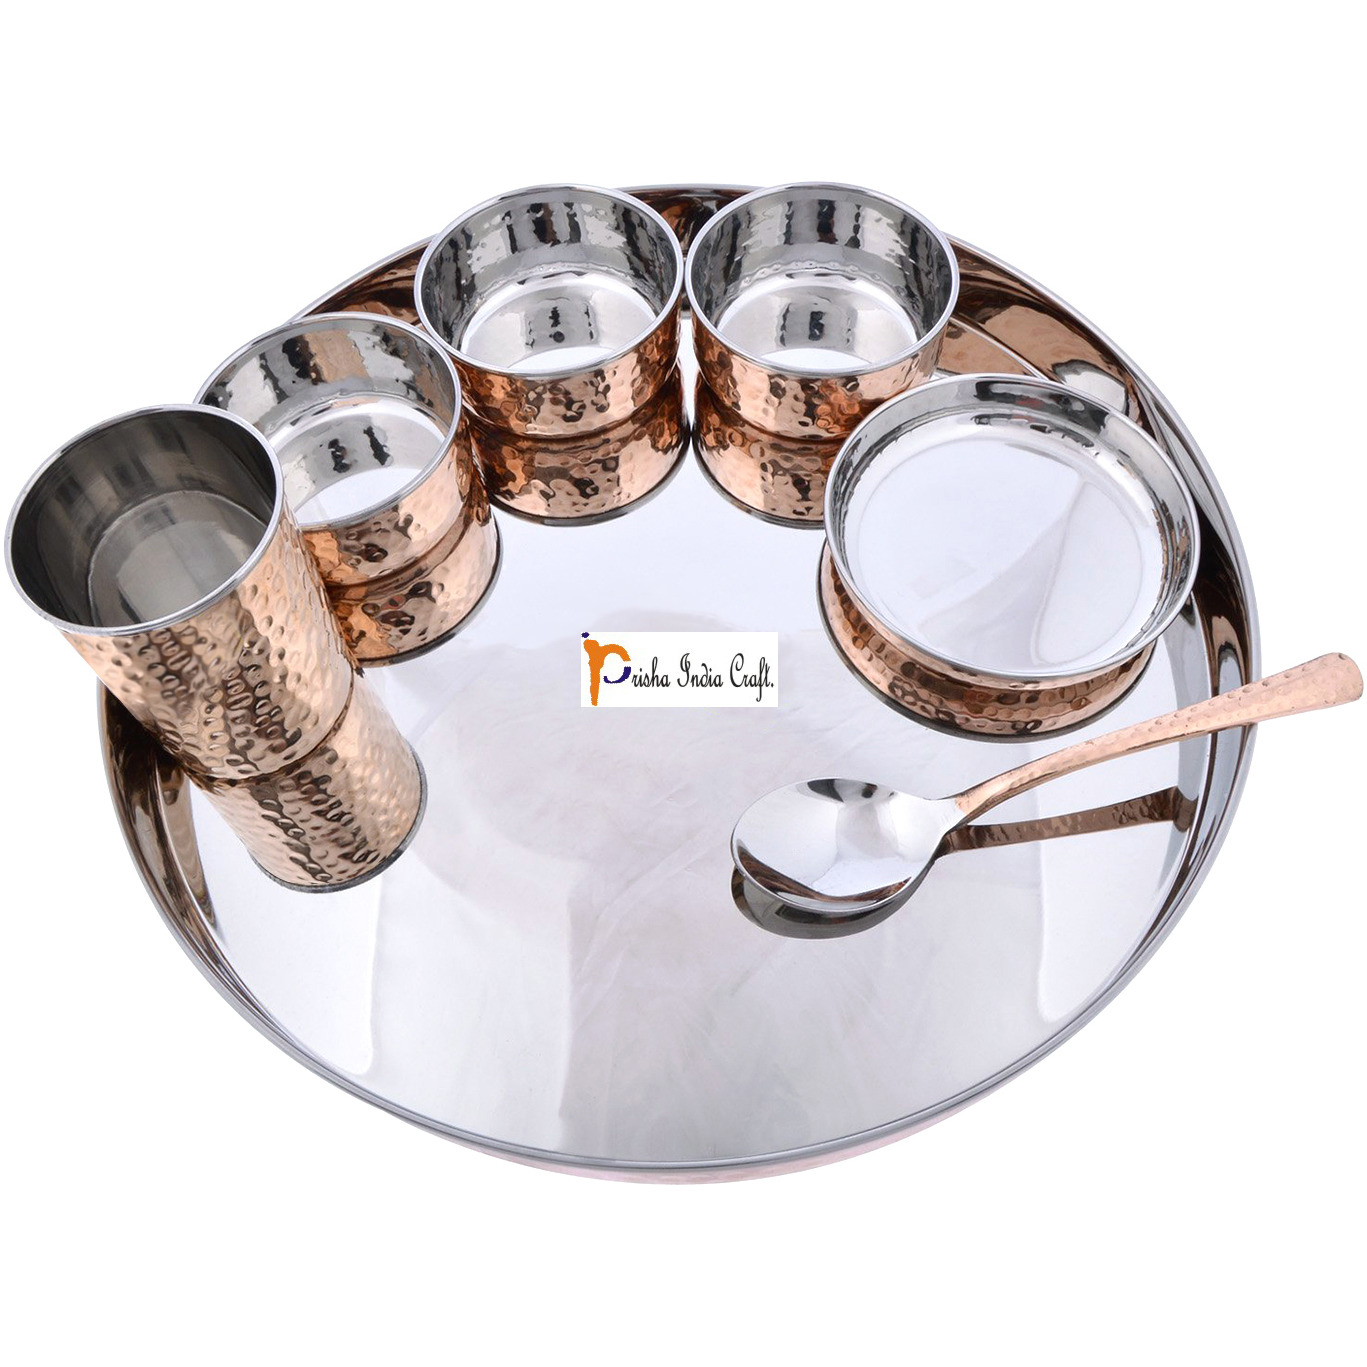 Prisha India Craft B. Set of 4 Dinnerware Traditional Stainless Steel Copper Dinner Set of Thali Plate, Bowls, Glass and Spoon, Dia 13  With 1 Luxury Style Pitcher Jug - Christmas Gift